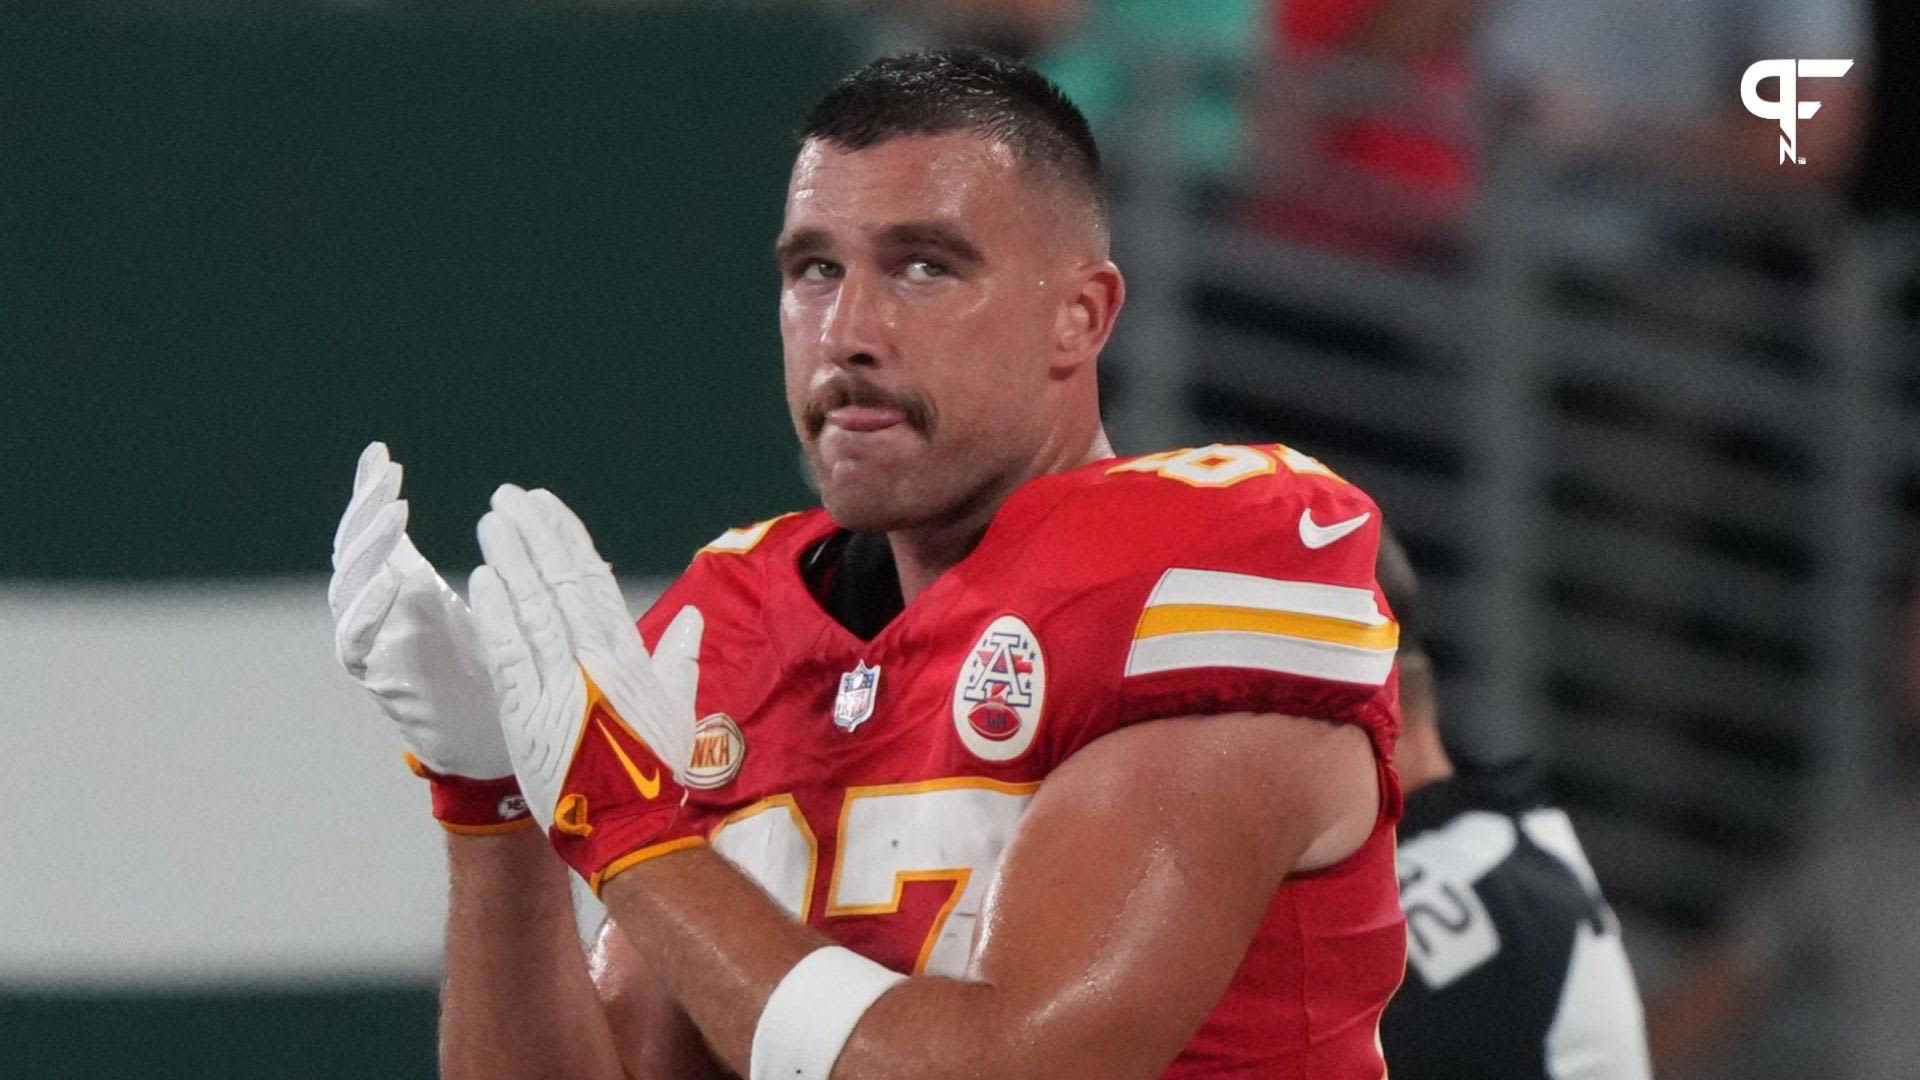 Chiefs TE Travis Kelce, Social Media Sensation Livvy Dunne Star in New Commercial: ‘Making Accelerator Look Amazing’